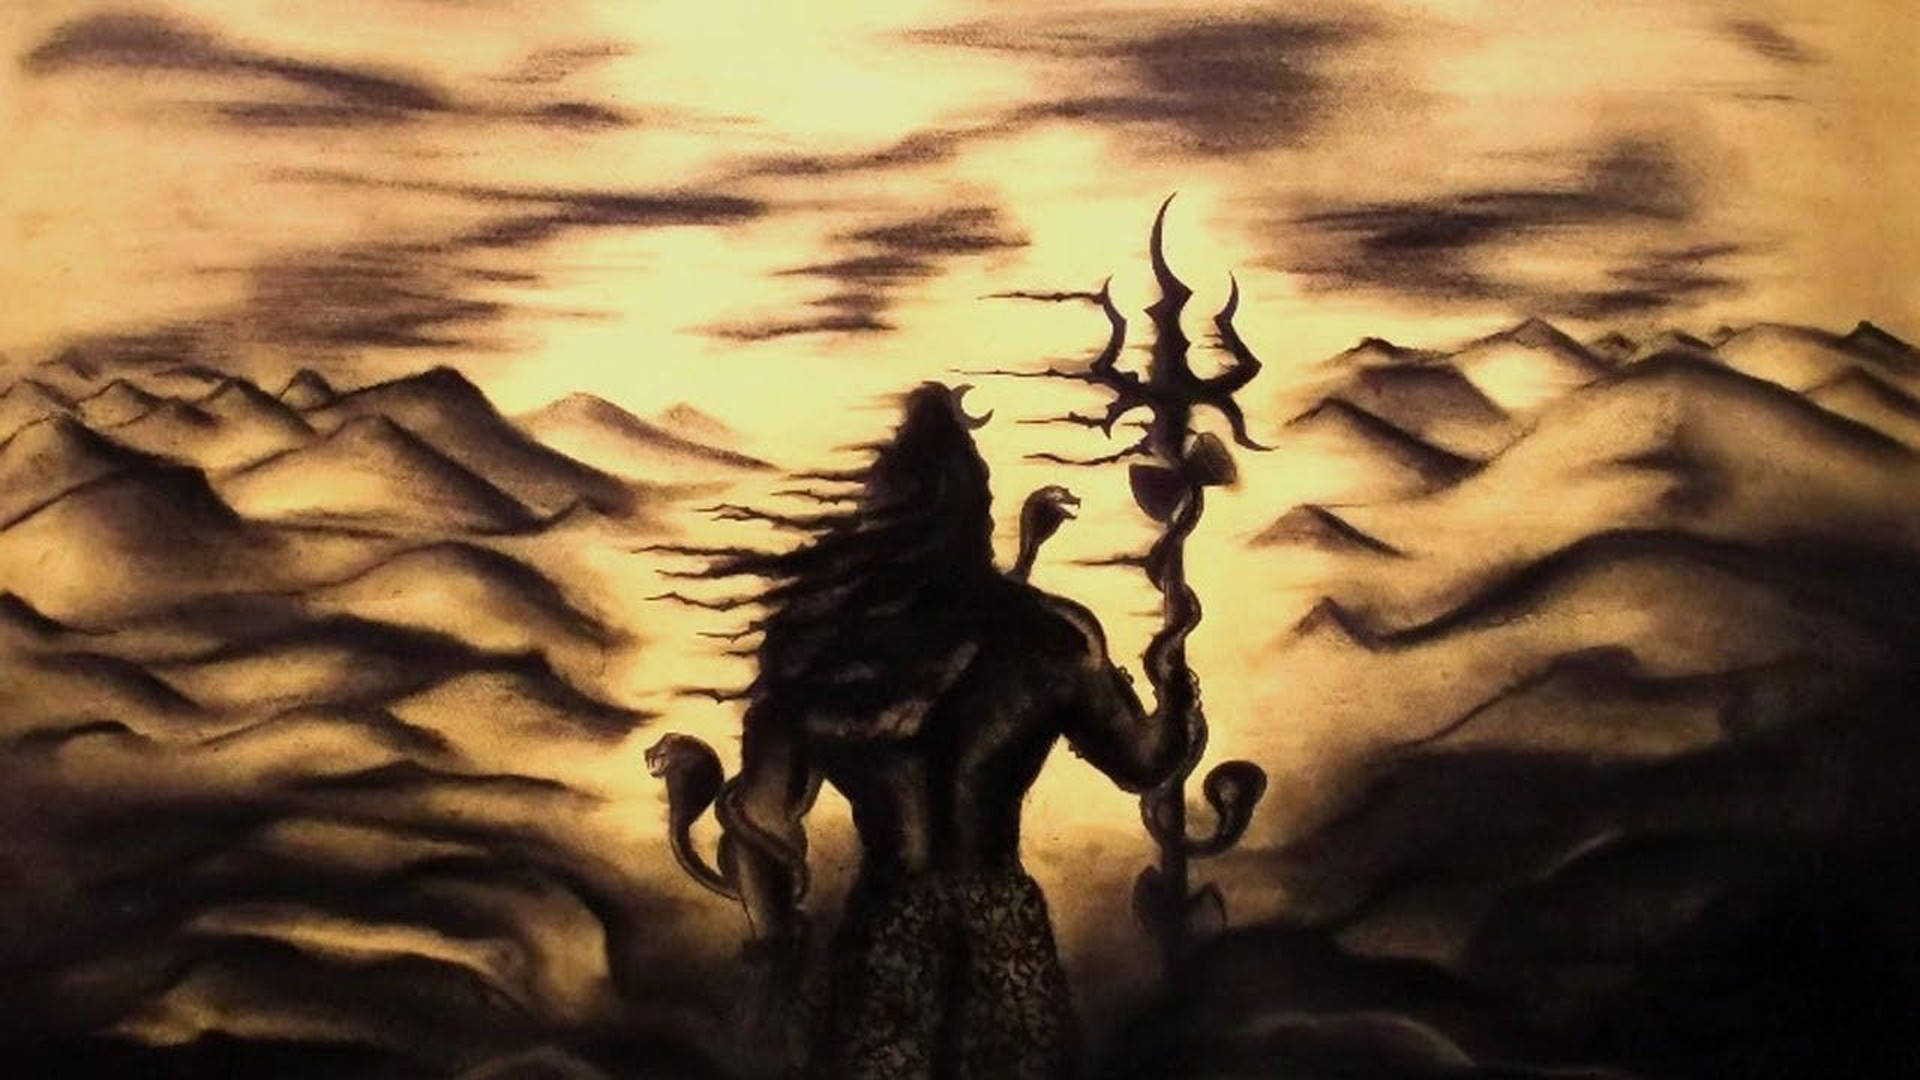 Download Bholenath Hd Lord Shiva Silhouette Mountains Wallpaper | Wallpapers .com